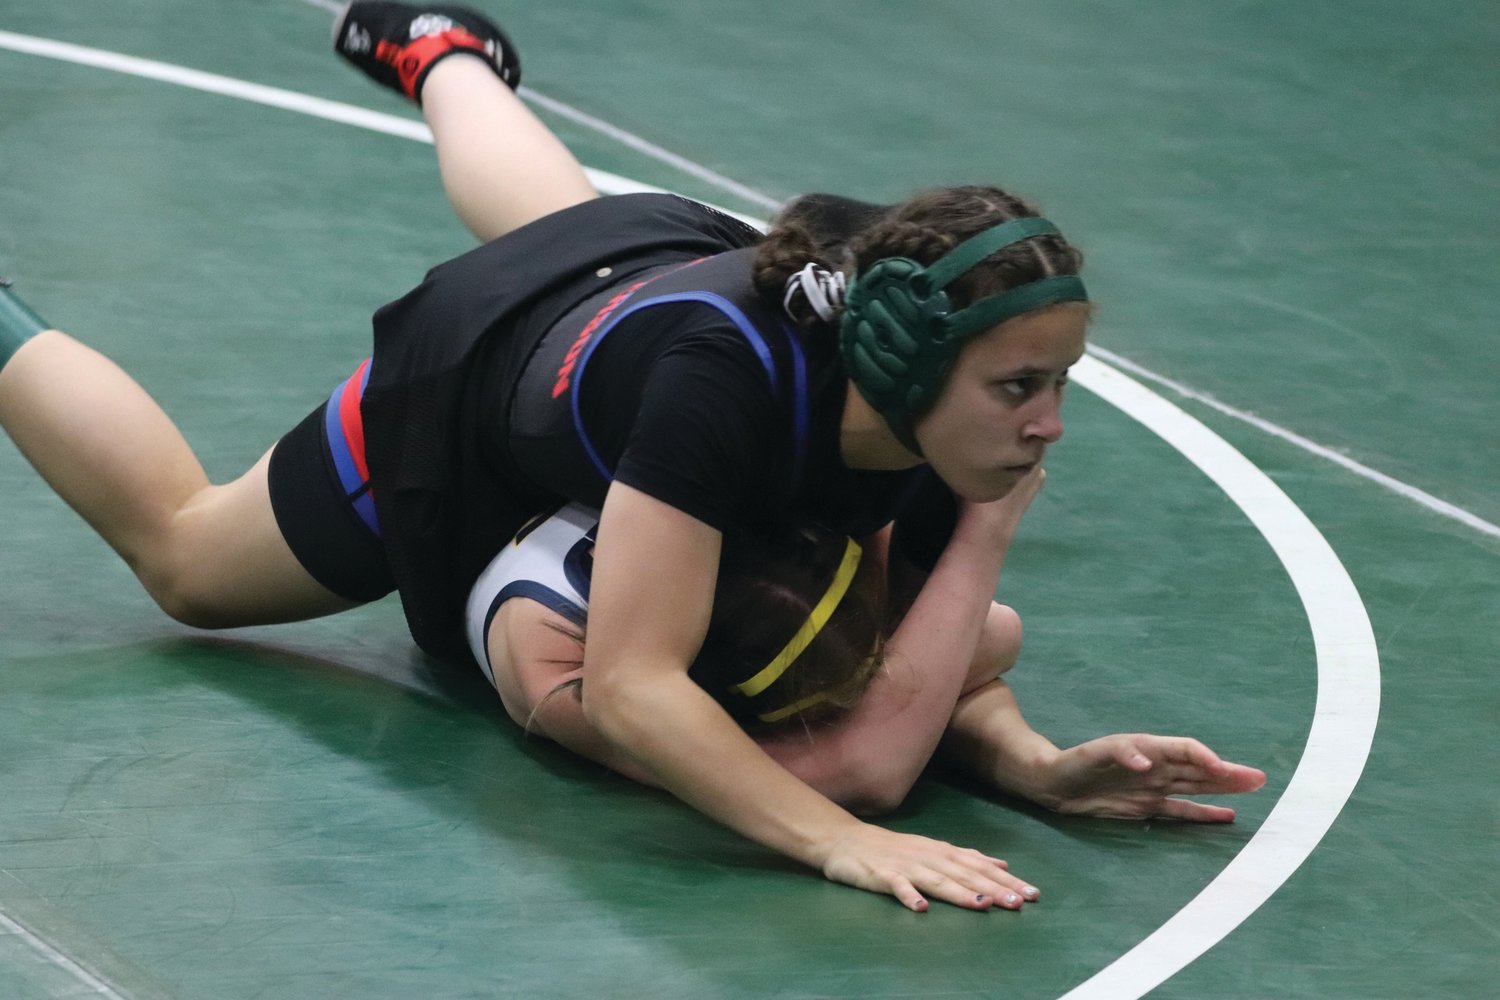 Junior Mi Amada Lanphear Ramirez, who competed at the state tournament in her first year of competitive wrestling, balances on her Forks High opponent and her hands, waiting for the opportunity to apply uncomfortable pressure. Lanphear Ramirez went on the win the match by fall.